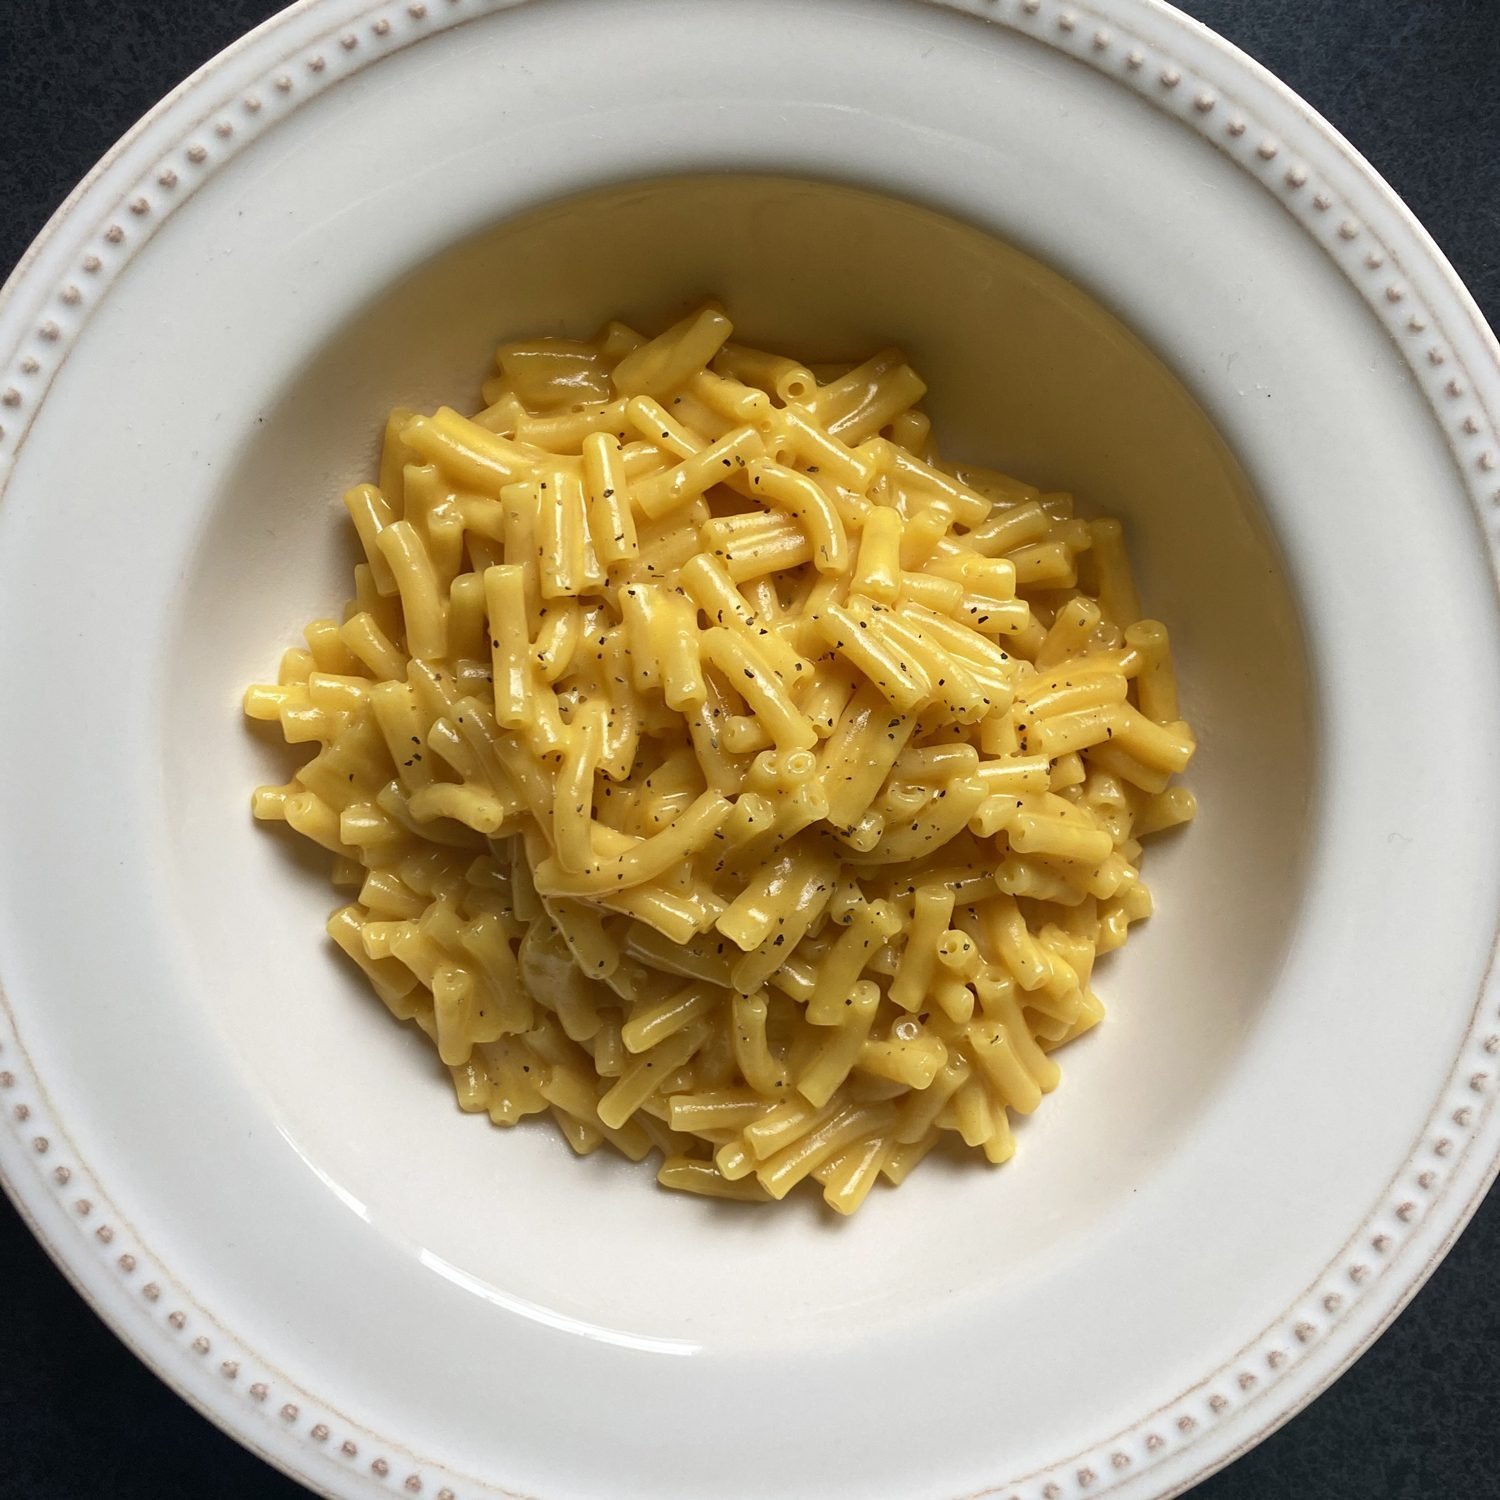 Kraft's newest Mac & Cheese is ditching cheese